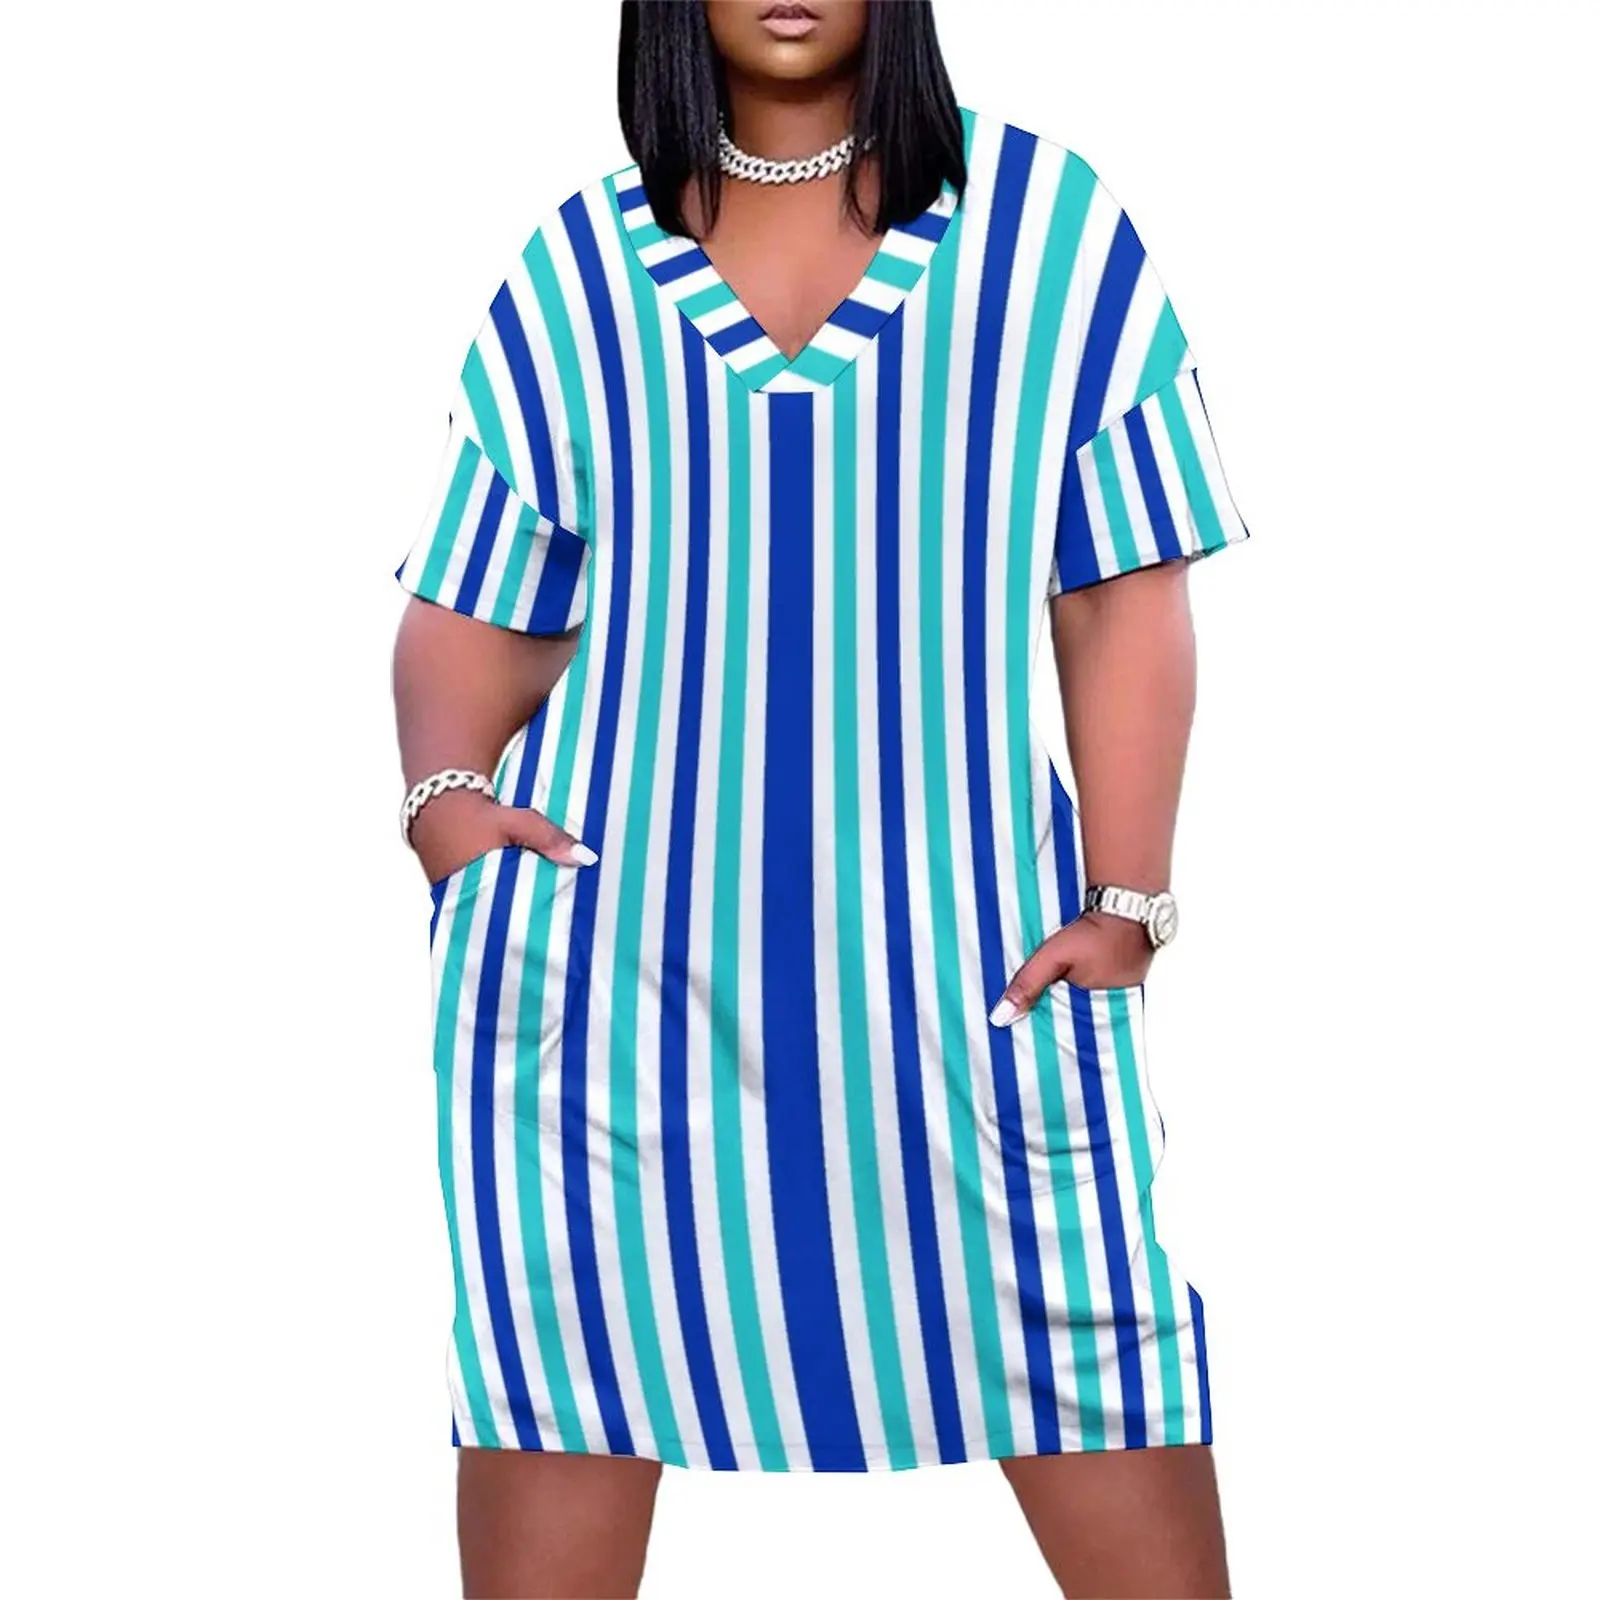 Vertical Striped Dress V Neck Blue And White Streetwear Dresses Summer Cute Casual Dress Woman Pattern Plus Size Clothes